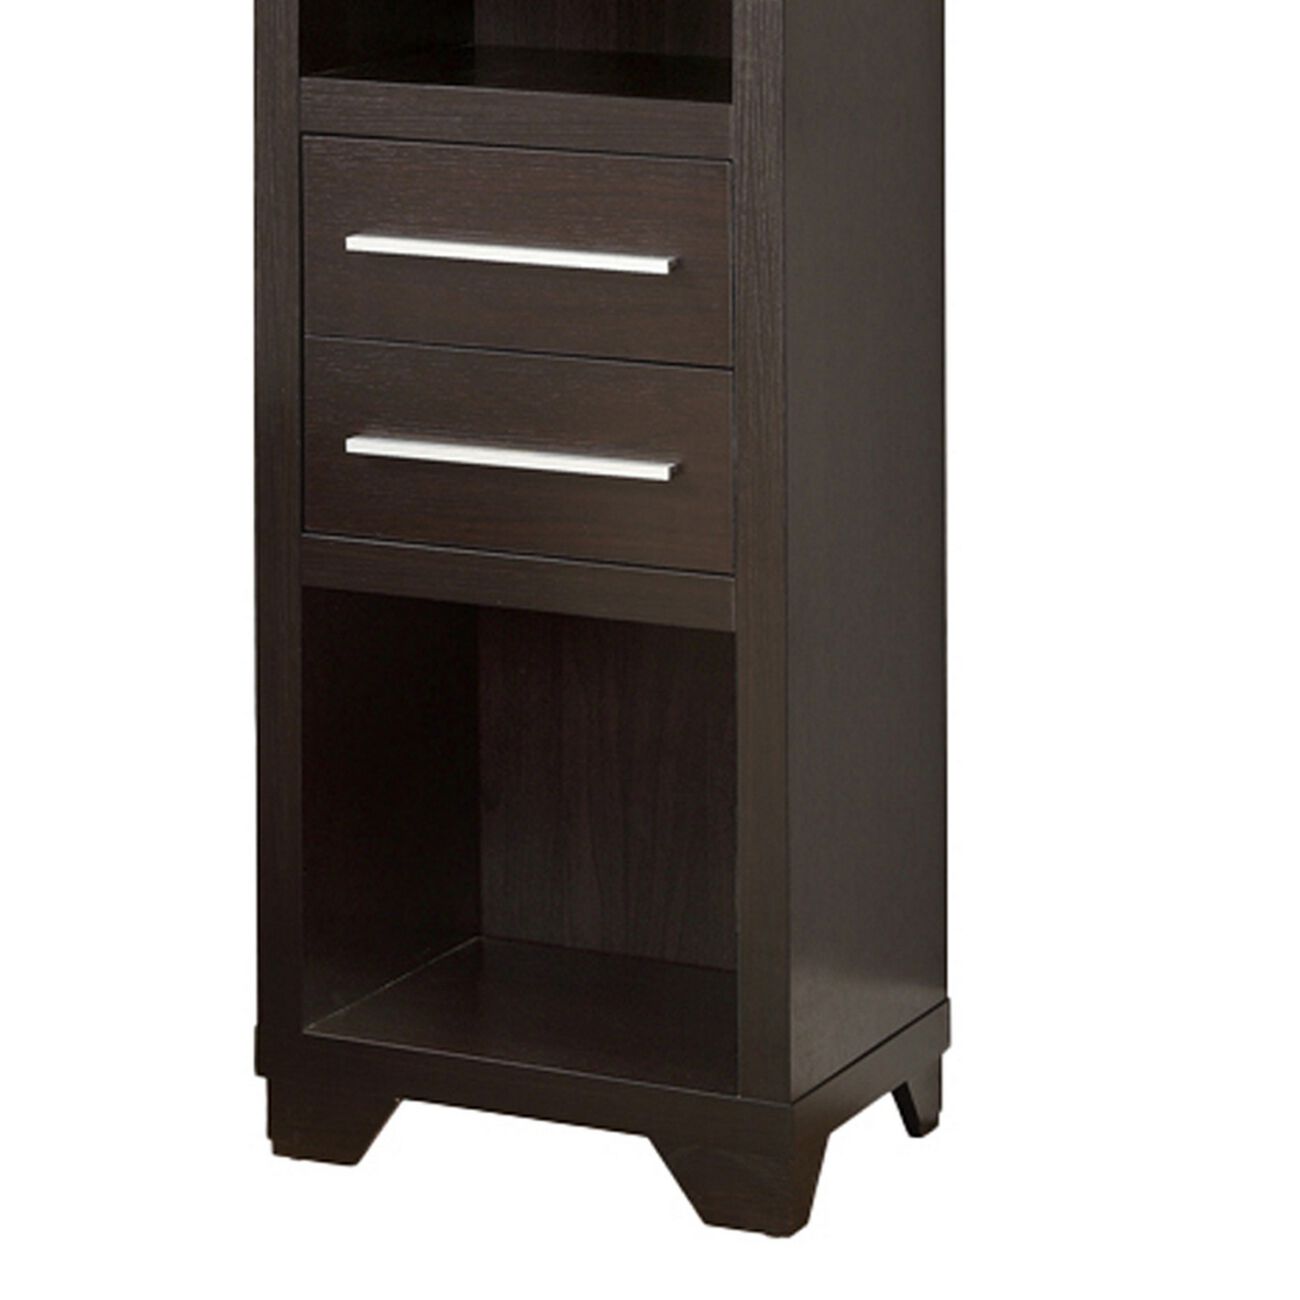 3 Open Compartment Wooden Media Tower with 2 Drawers, Dark Brown